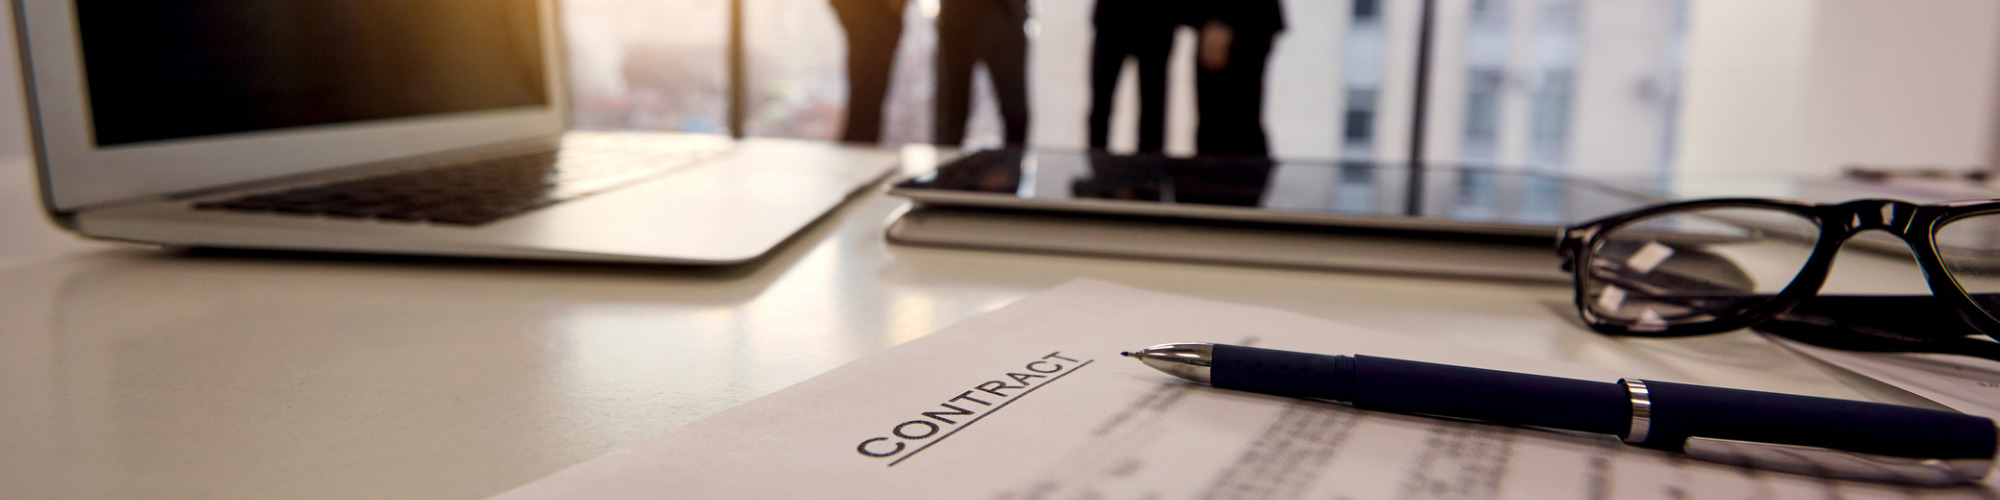 Drafting Commercial Contracts - The Topical Issues Live at Your Desk 